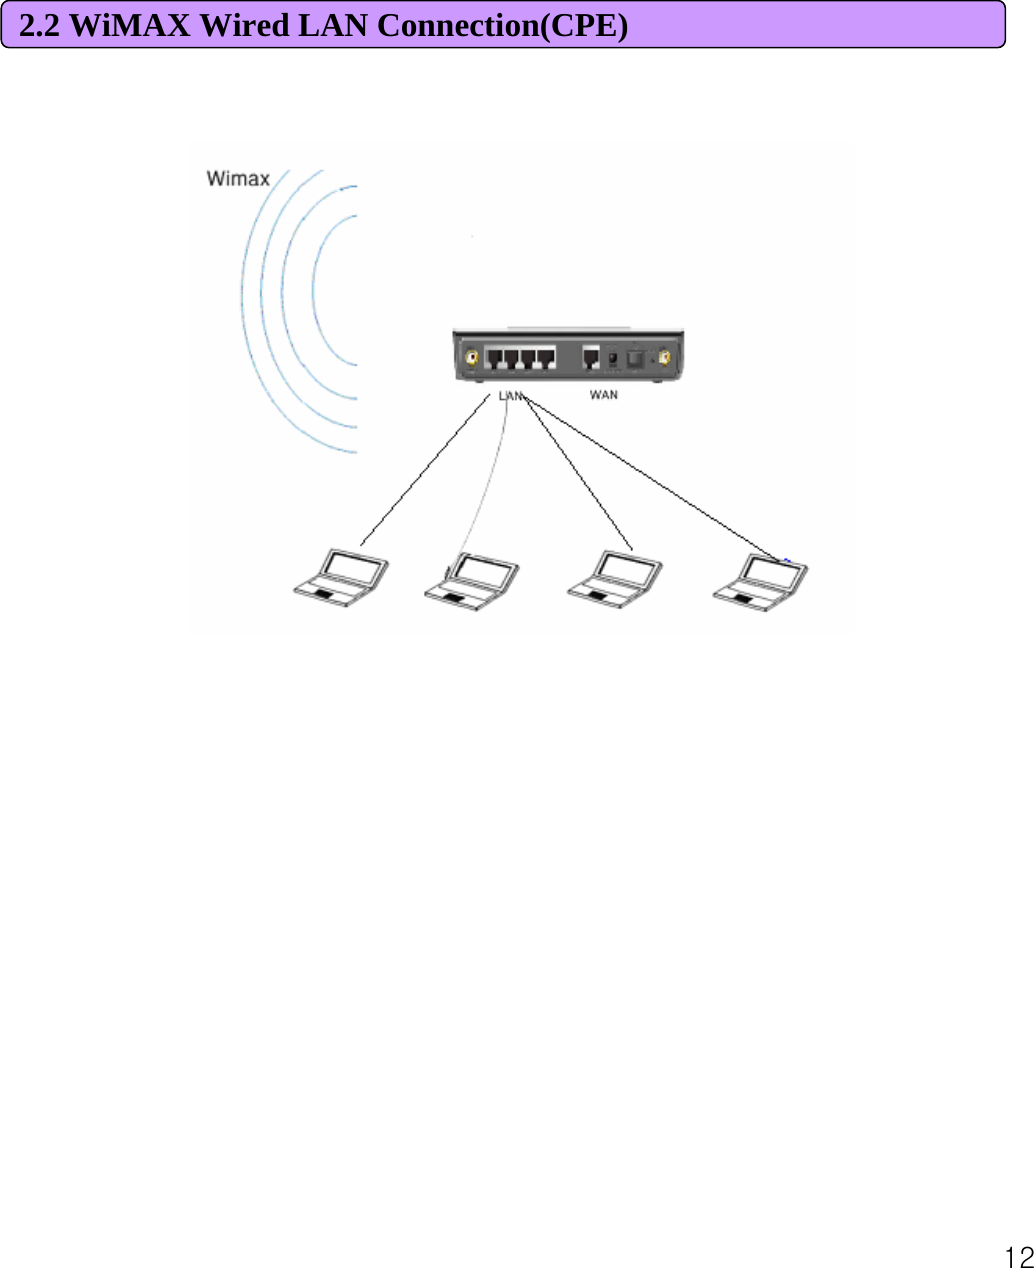 122.2 WiMAX Wired LAN Connection(CPE)